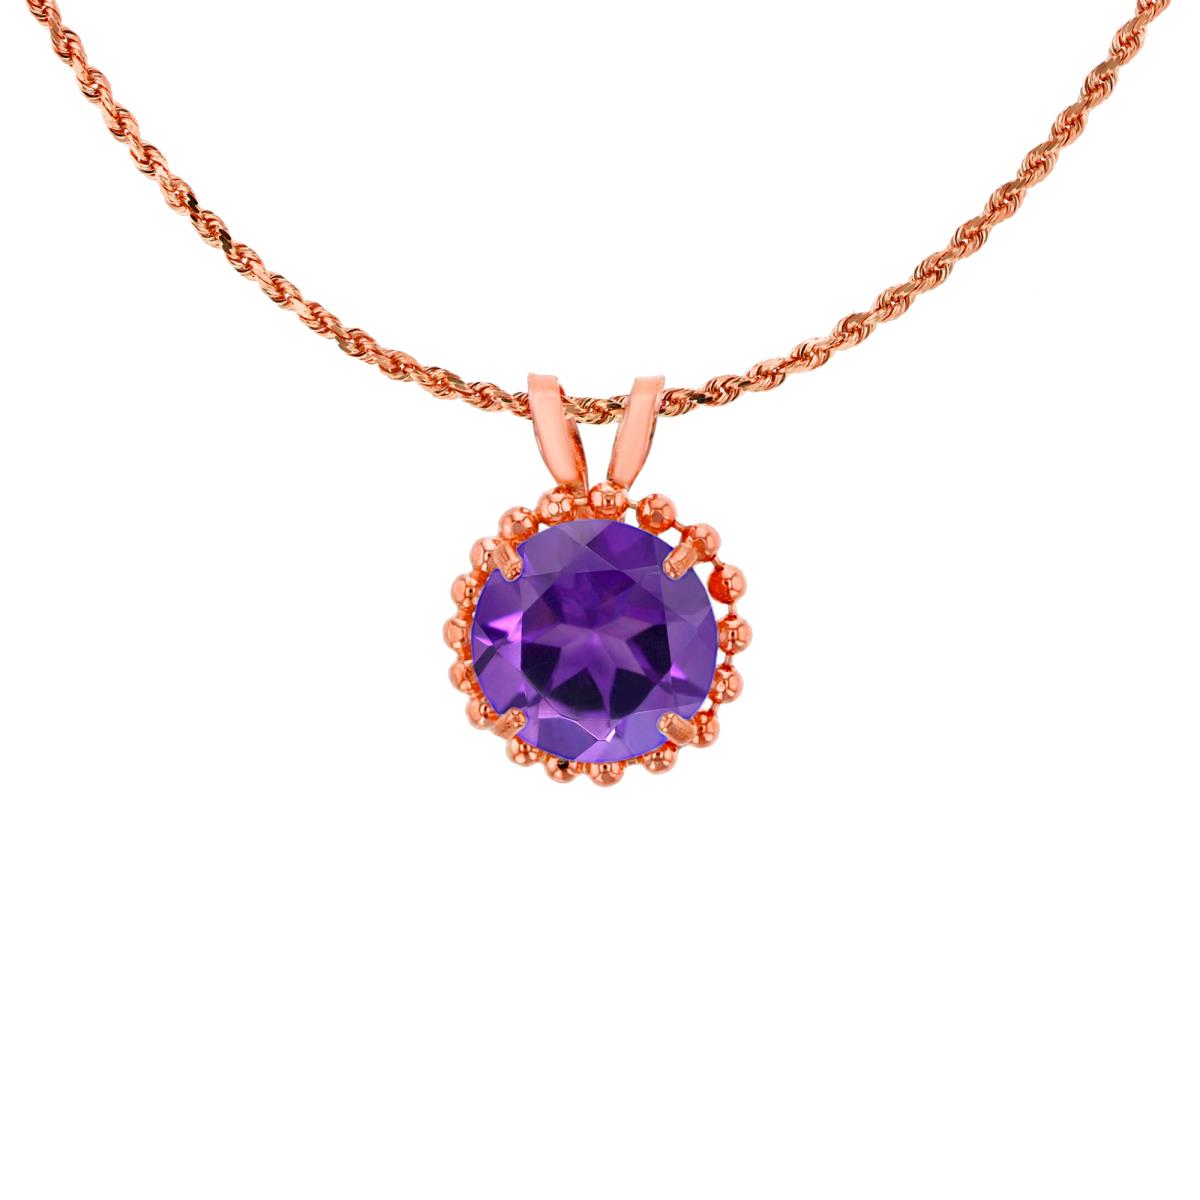 10K Rose Gold 6mm Rd Cut Amethyst with Bead Frame Rabbit Ear 18" Necklace